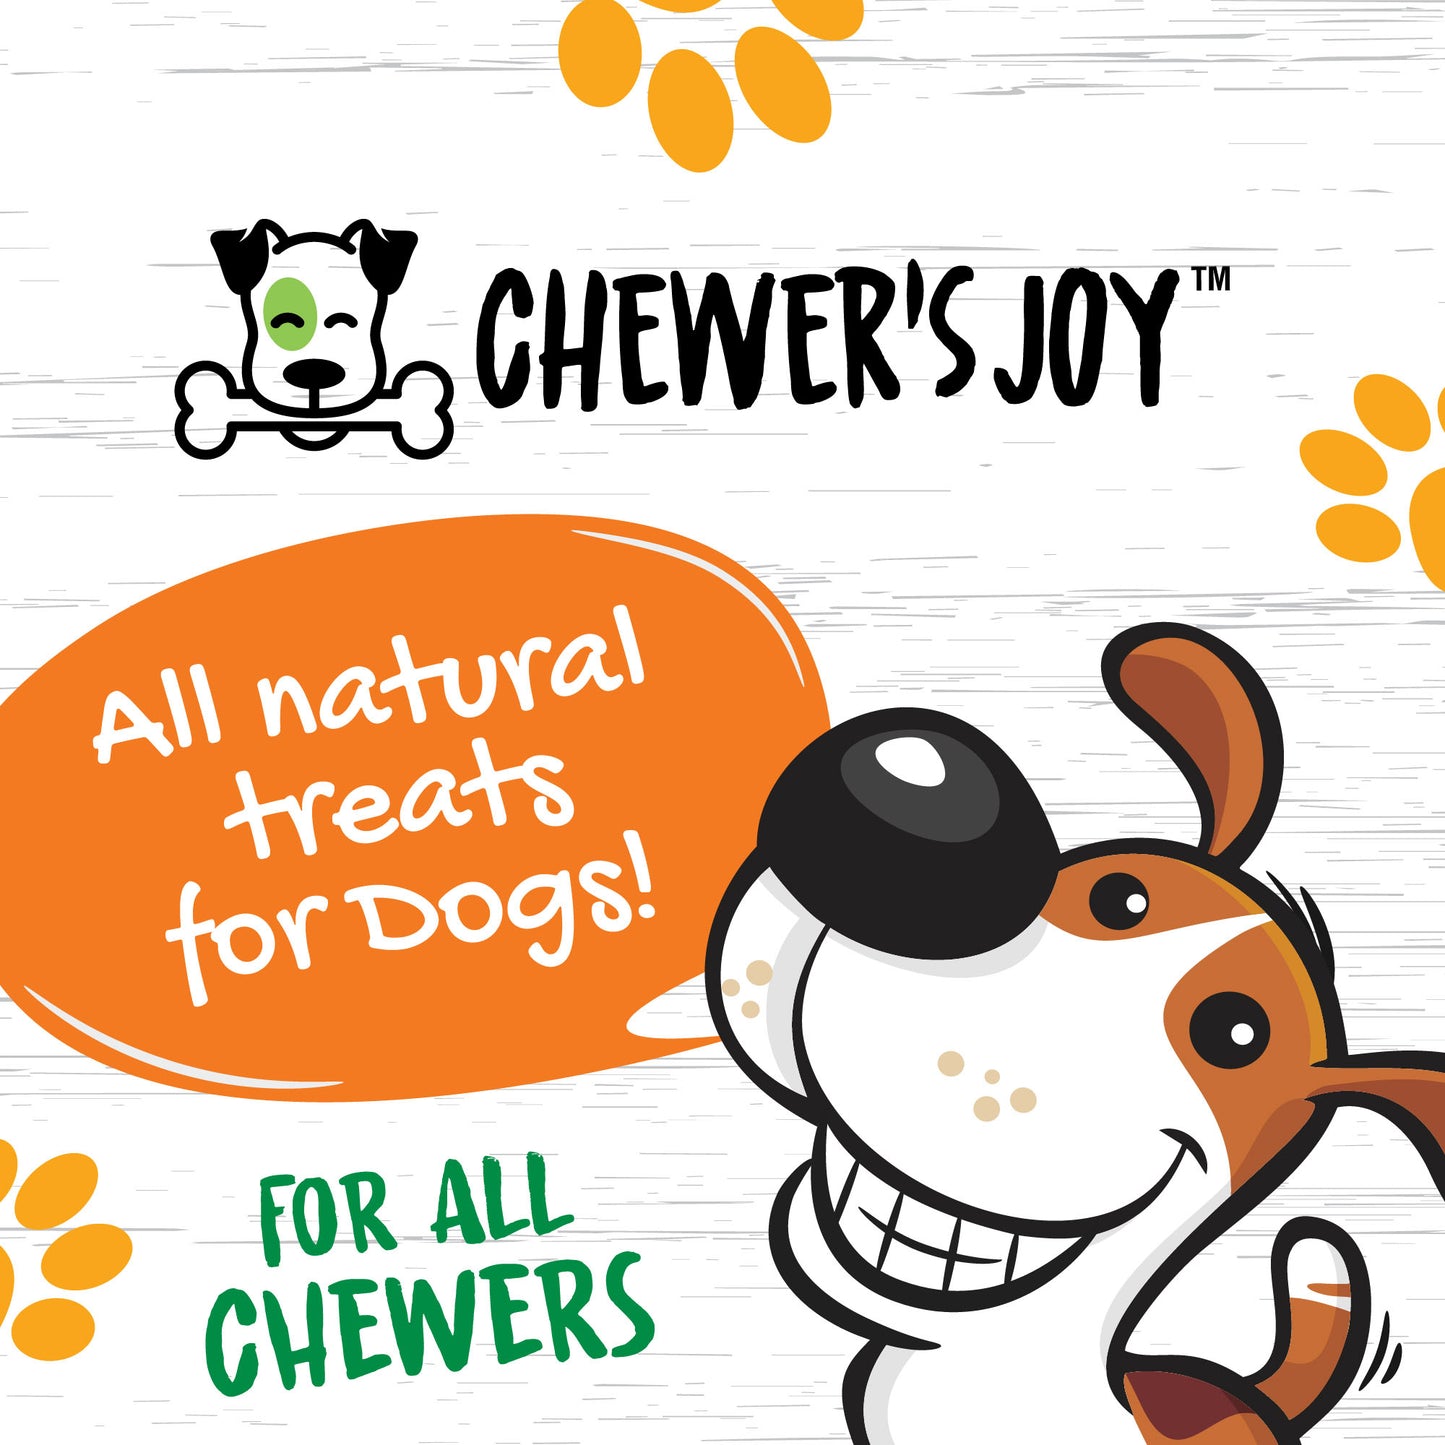 Chewer's Joy Collagen Spring Sticks 15pk 5-6" Dog Treats, High Protein, Supports Strong Joints, Boost Digestion, Promotes Shiny Coats & Dental Hygiene.